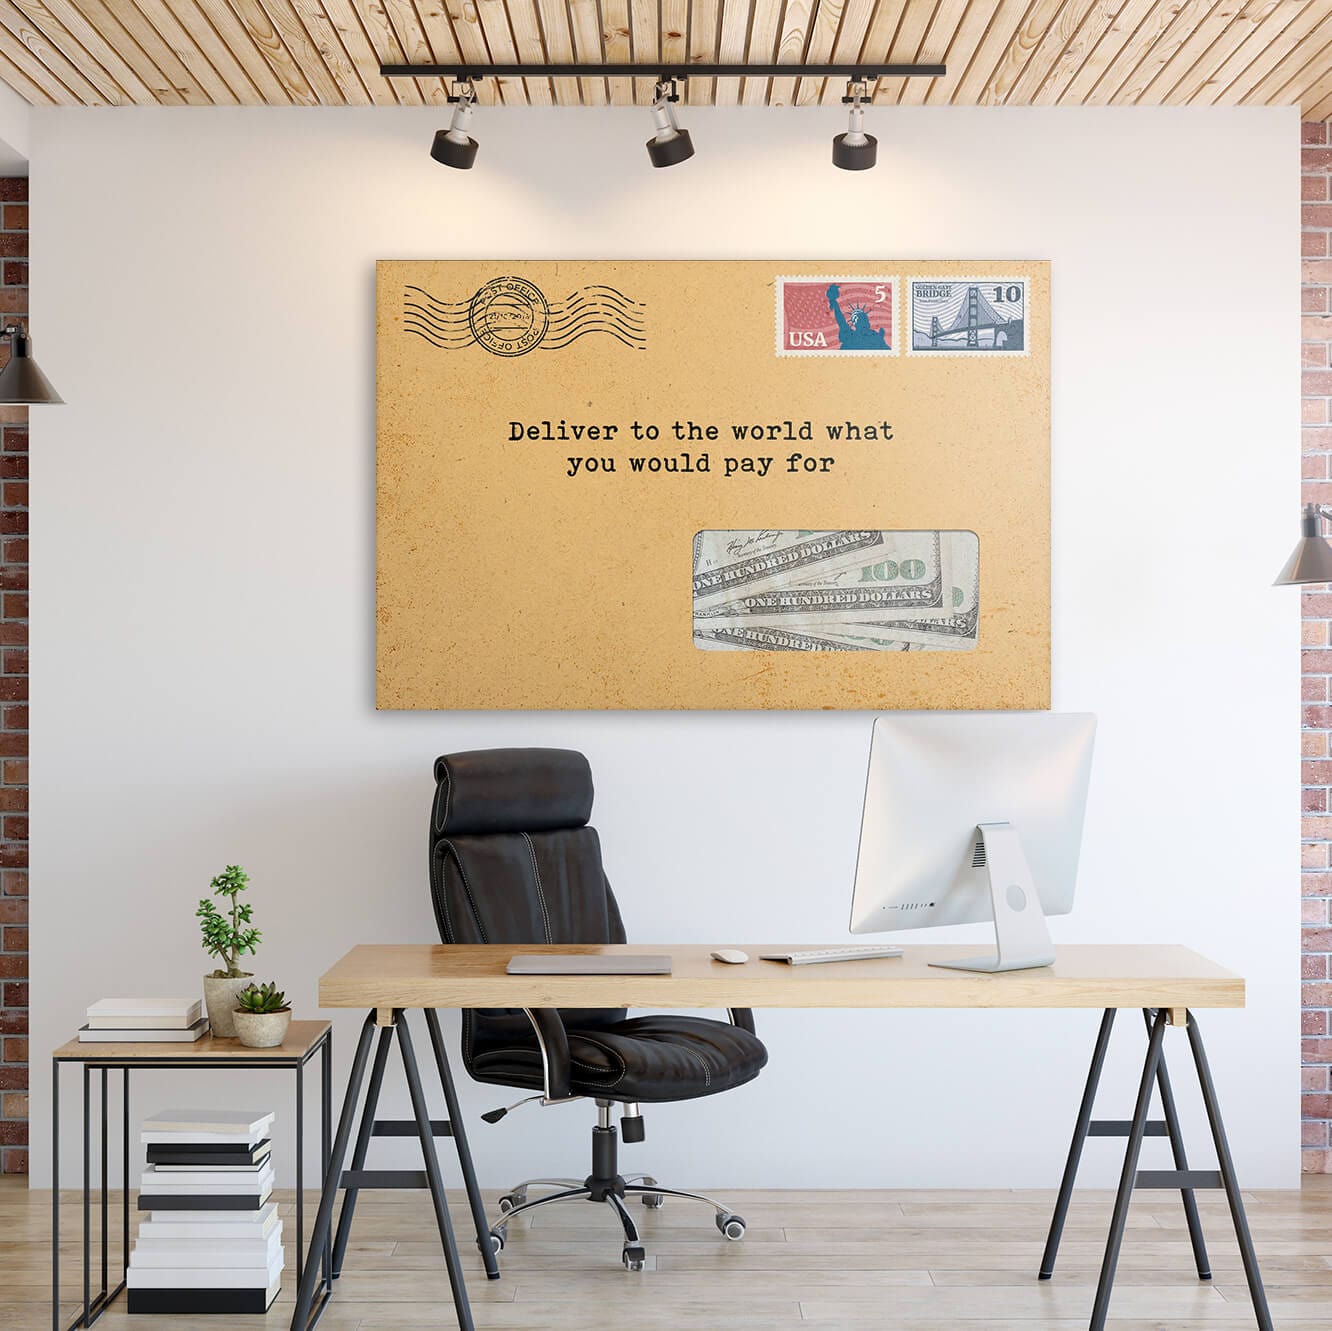 Deliver to the World Wall Art | Inspirational Wall Art Motivational Wall Art Quotes Office Art | ImpaktMaker Exclusive Canvas Art Landscape